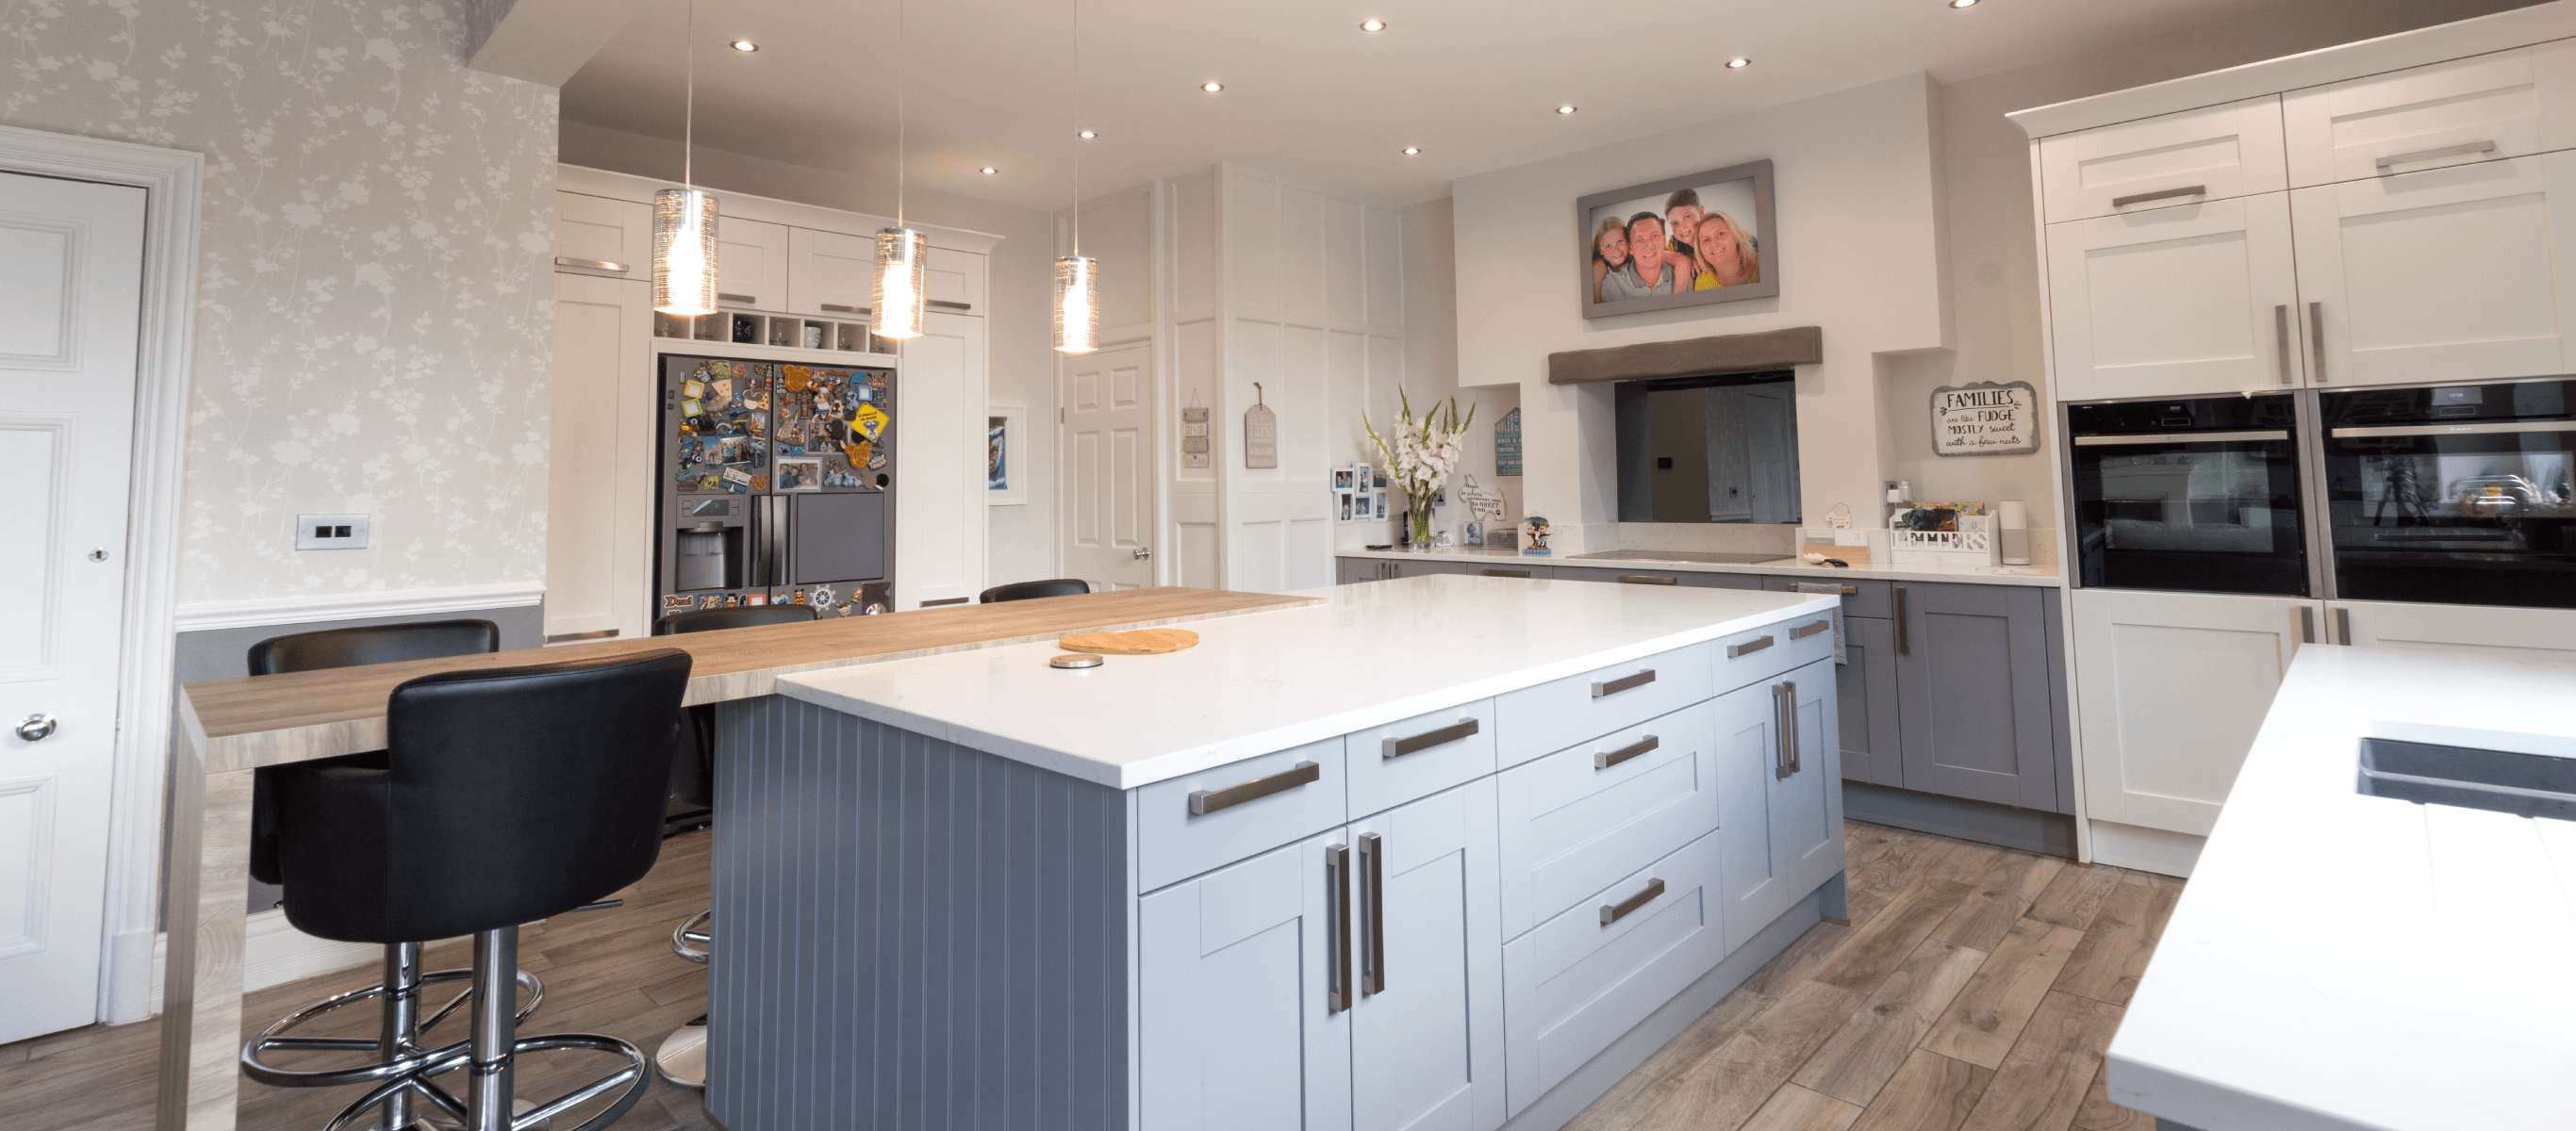 A Traditional Family Focused Kitchen With A Sophisticated Style